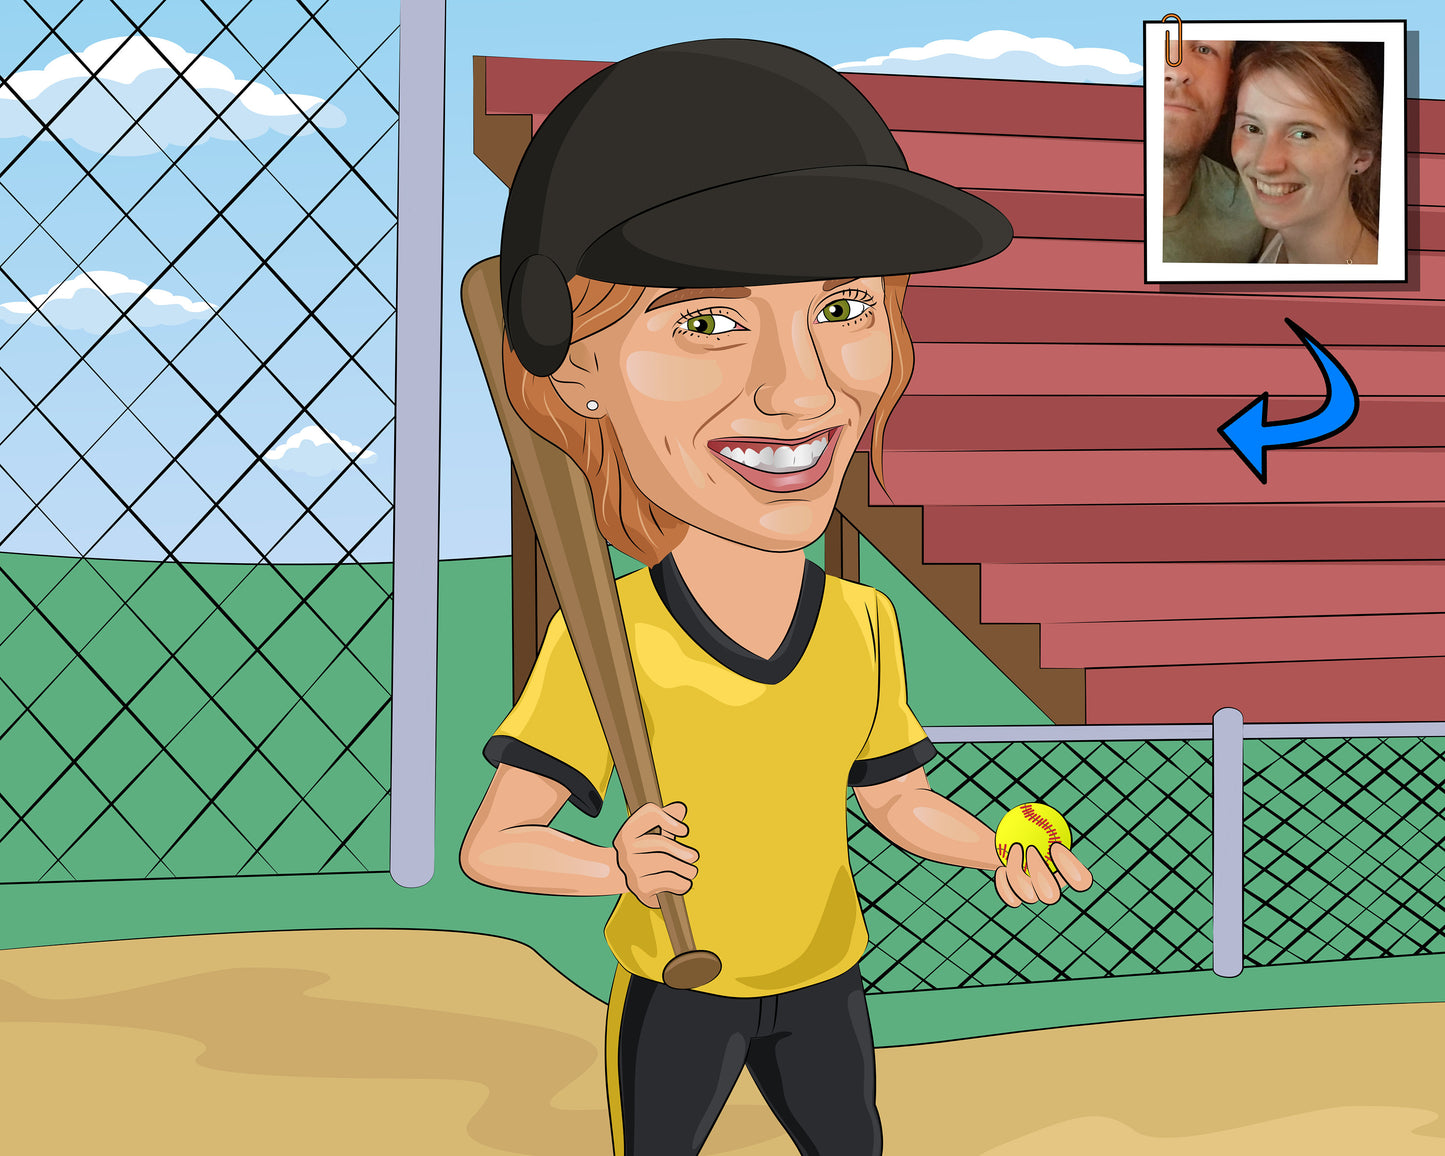 Softball Player Gift - Custom Caricature Portrait From Your Photo/softball coach gift